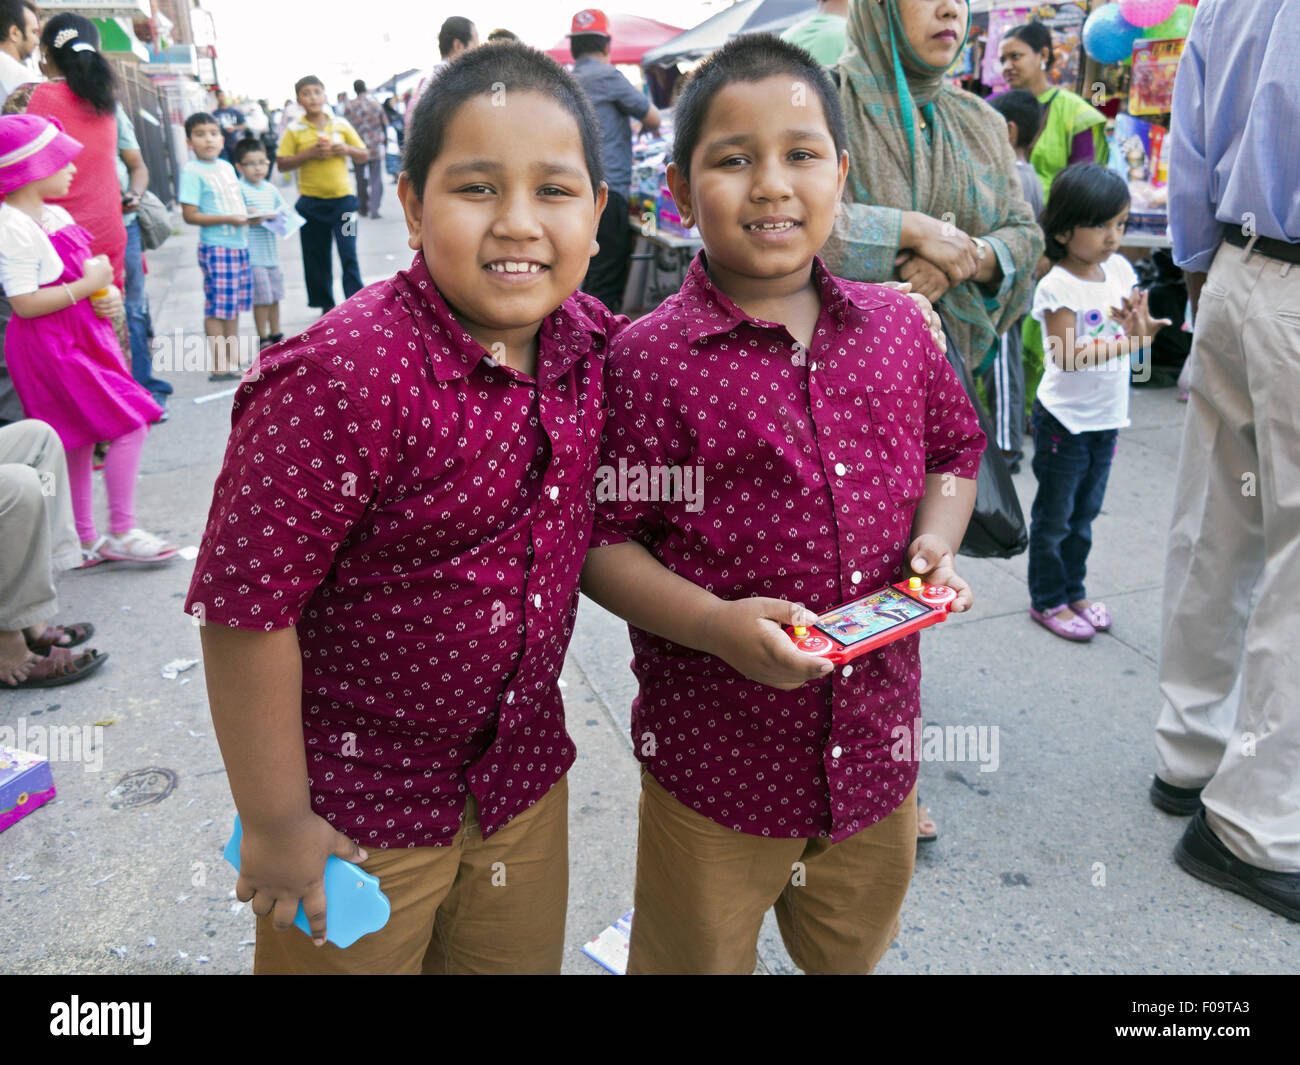 Identical Twins Children High Resolution Stock Photography And Images Alamy